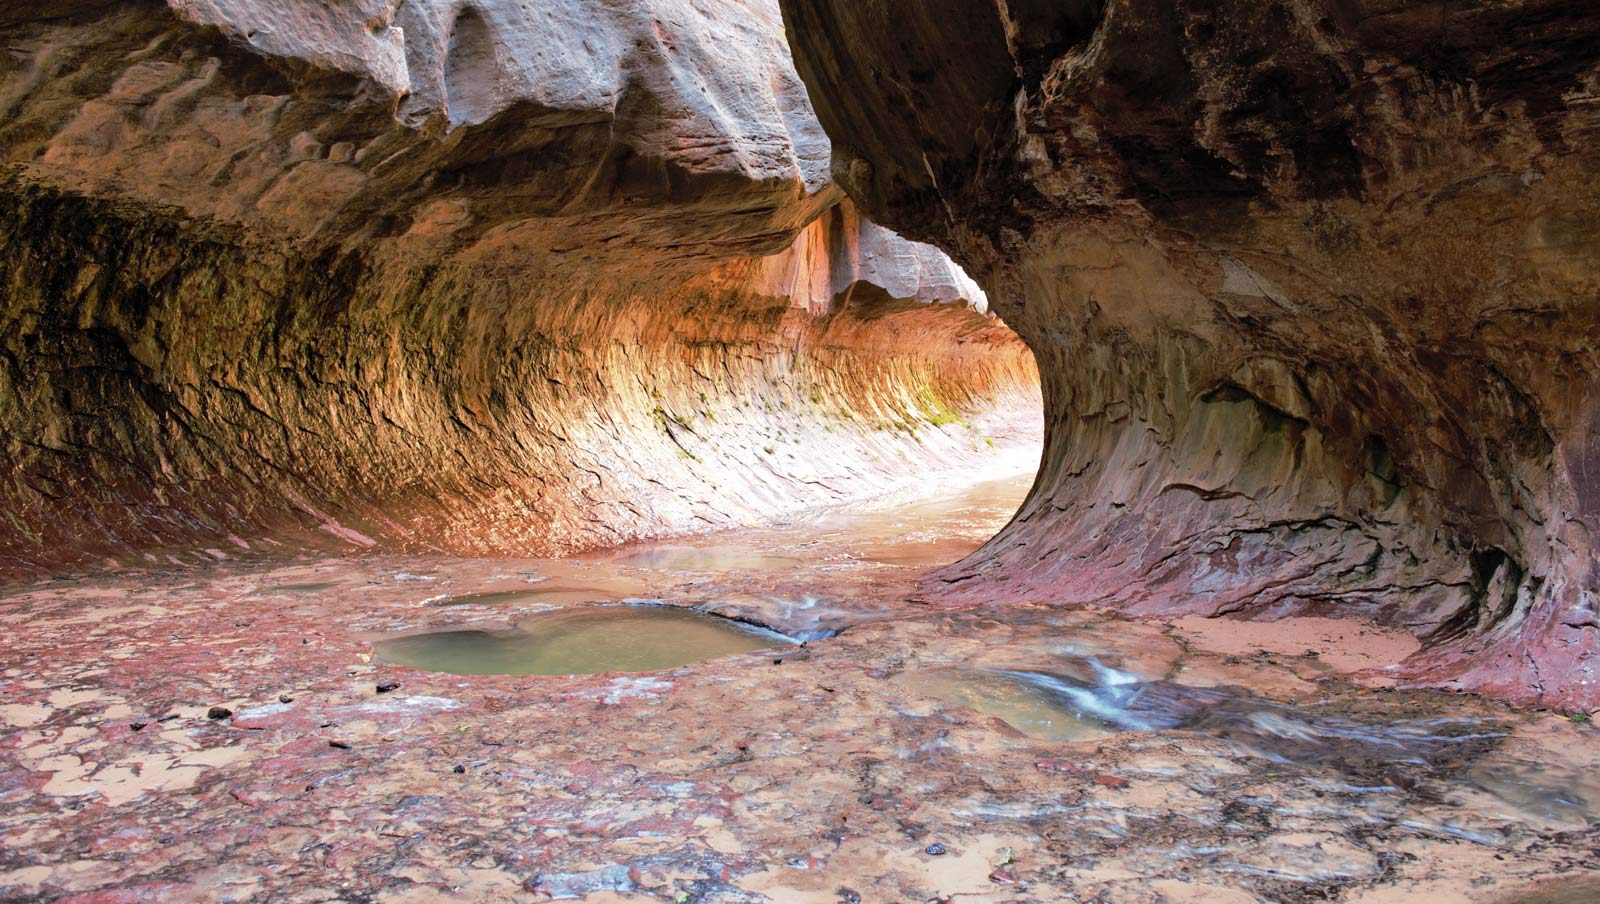 The Subway Hike in Zion National Park